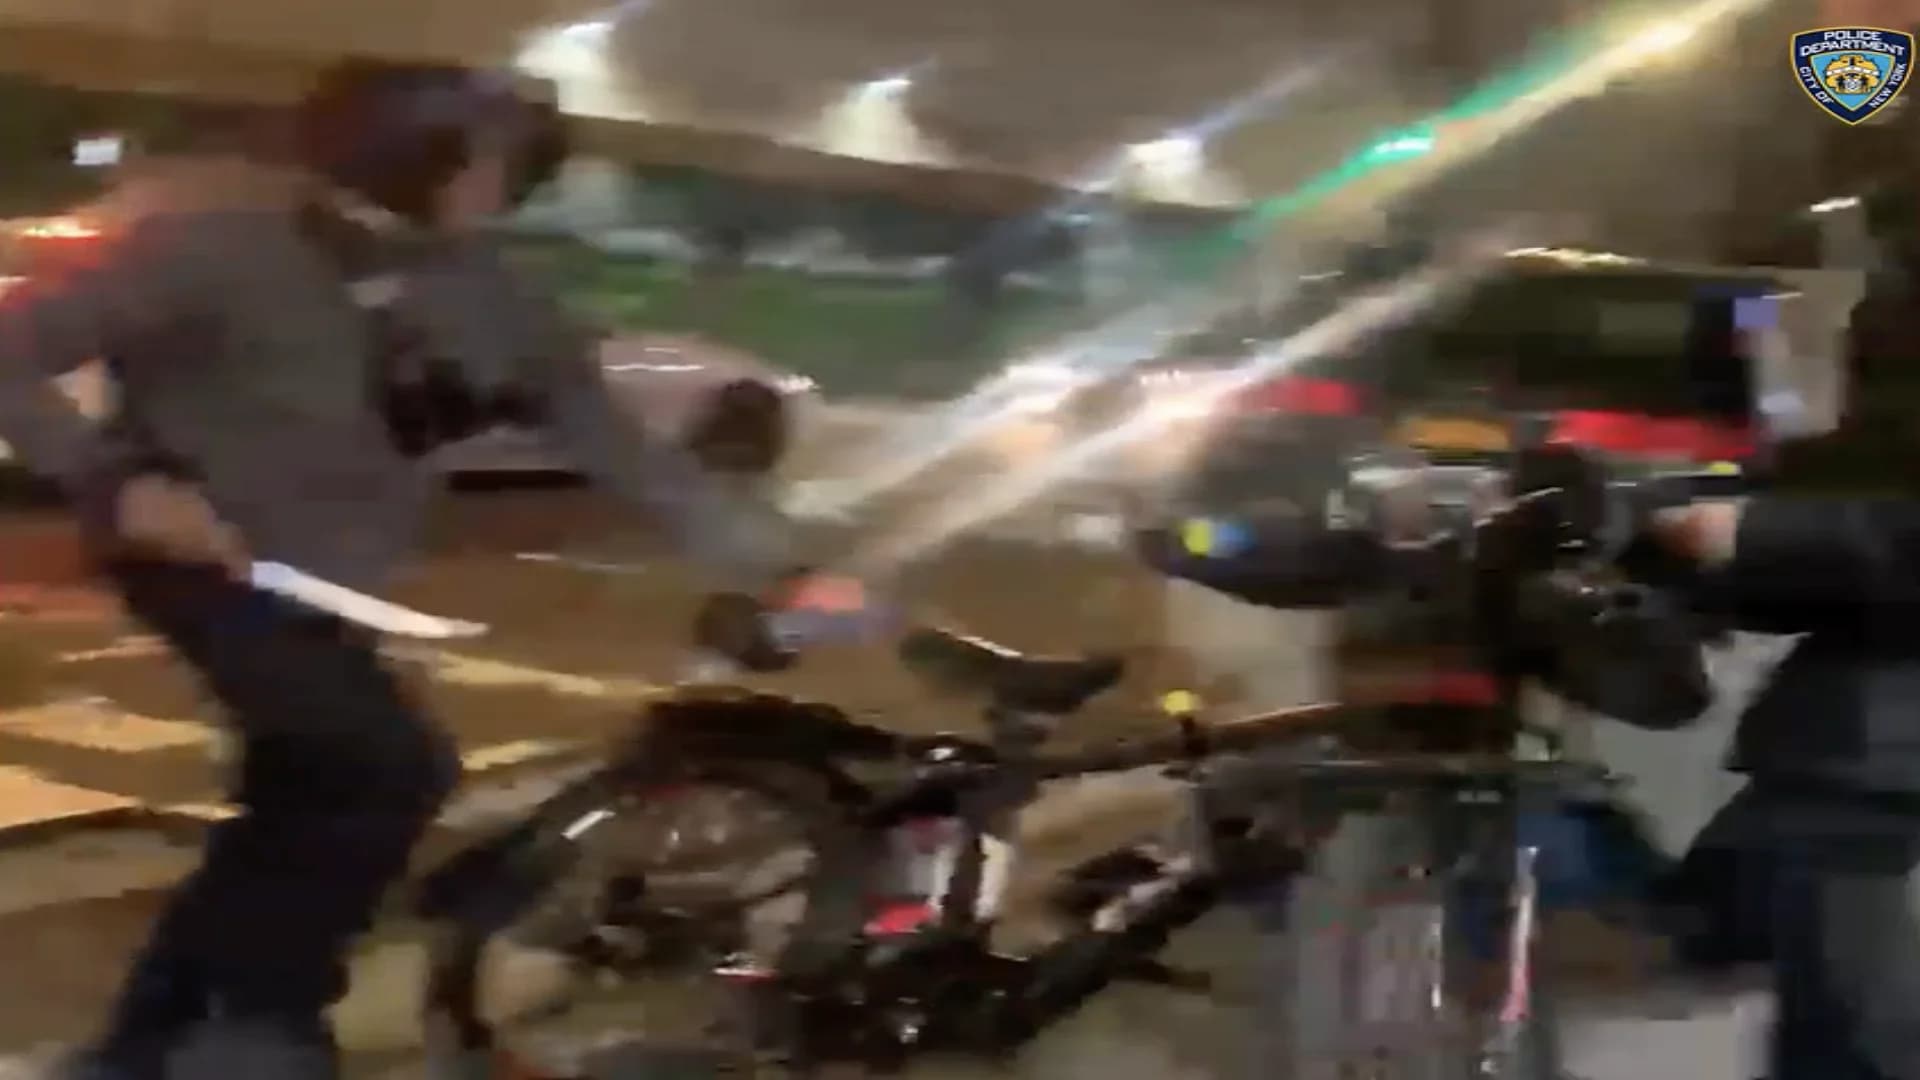 Wild video shows fight over an e-bike in Tremont robbery